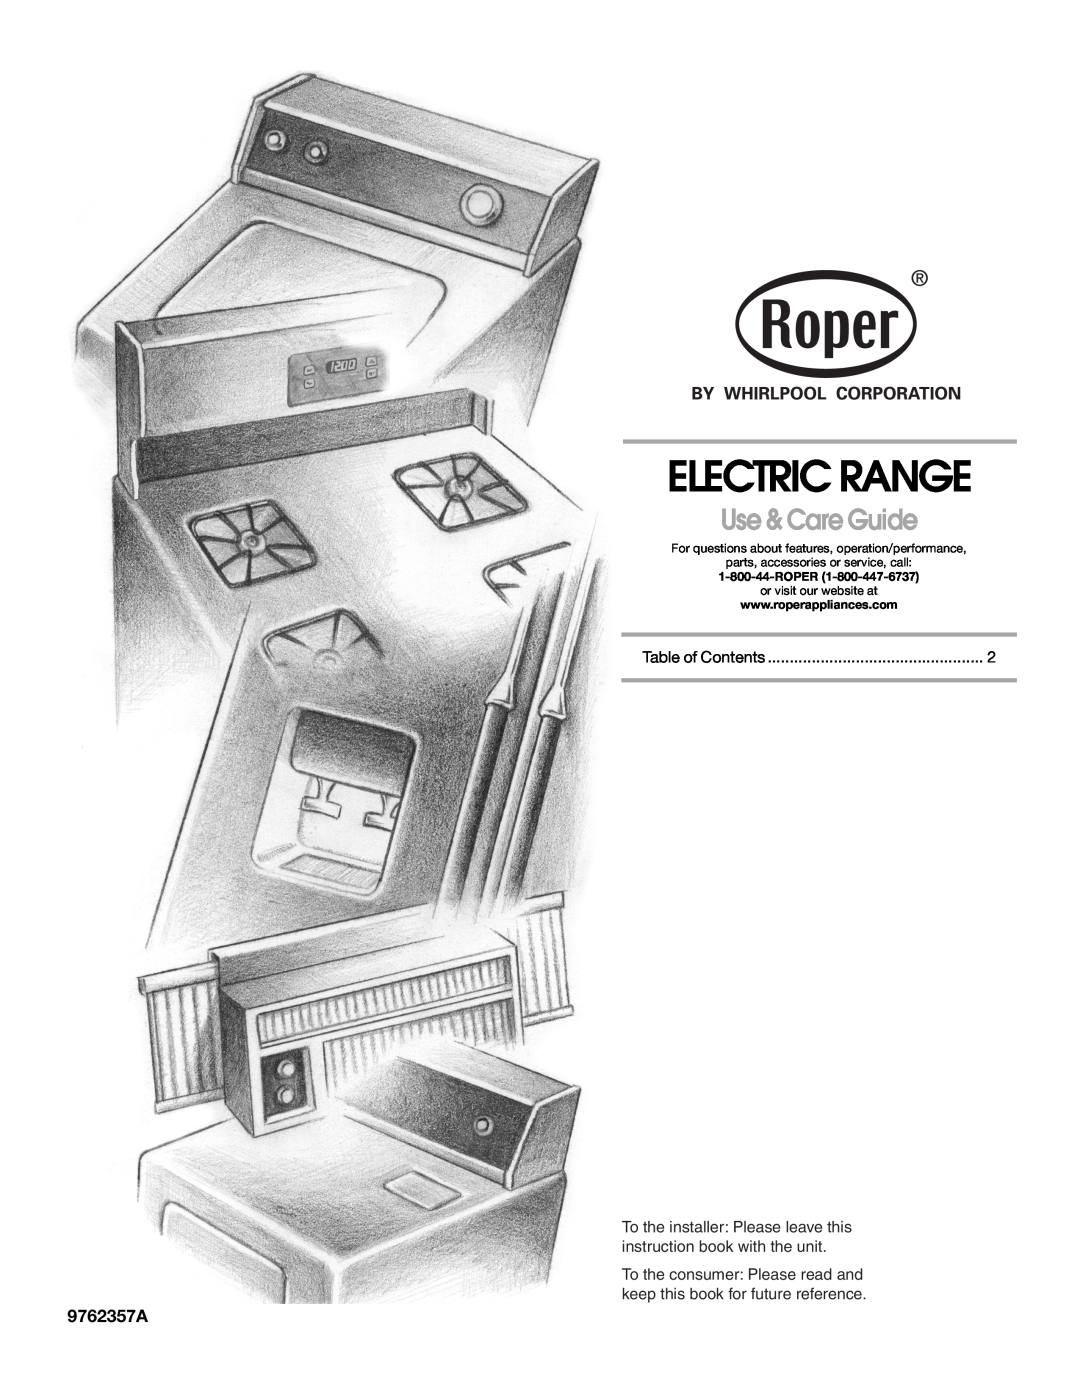 Whirlpool FES325RQ1 manual 9762357A, Electric Range, Use & Care Guide, For questions about features, operation/performance 